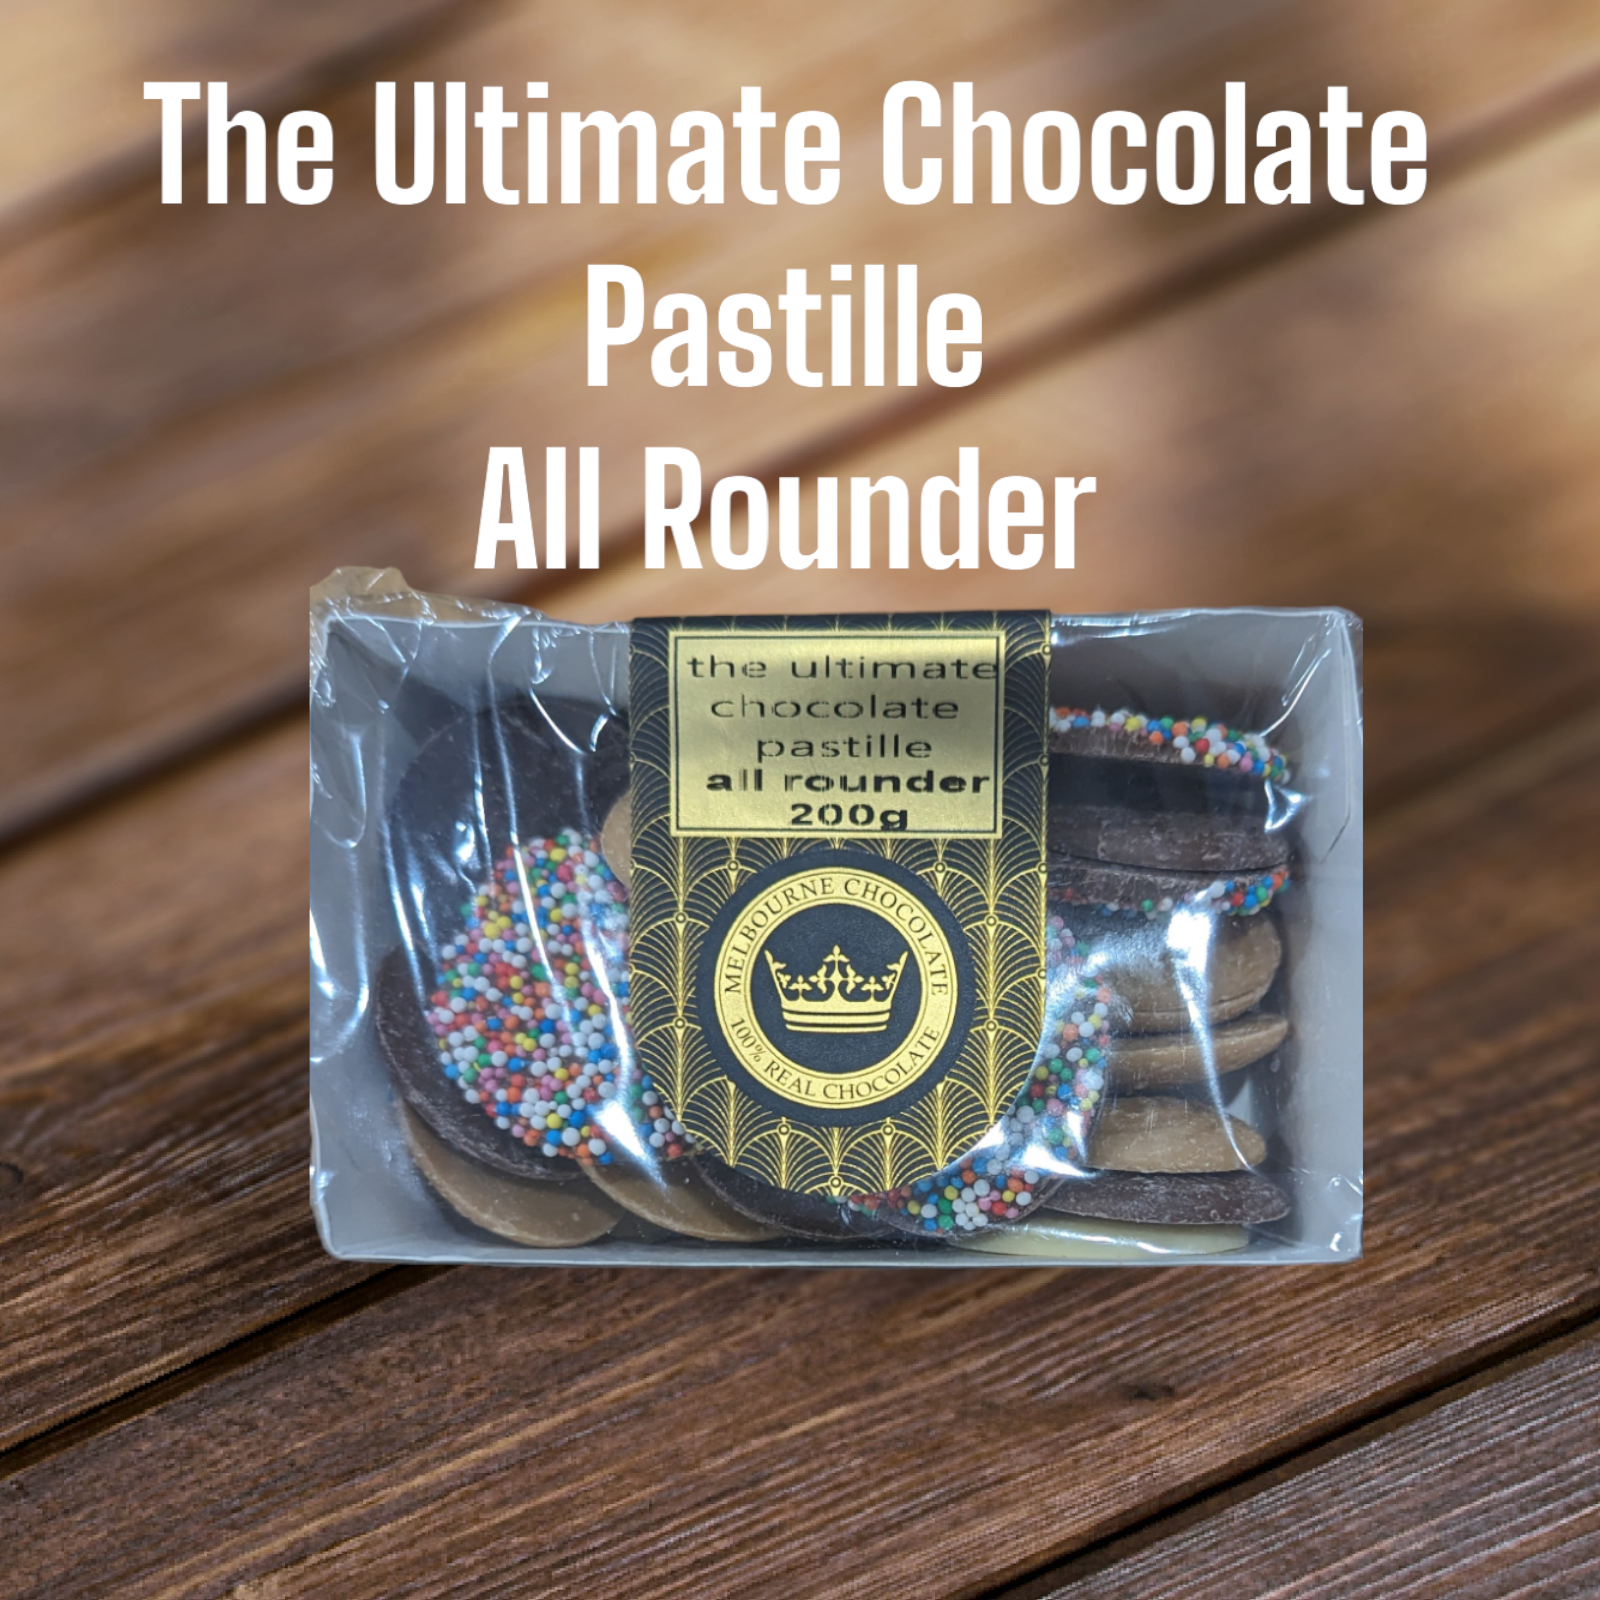 The Ultimate Chocolate Pastille All Rounder 200g